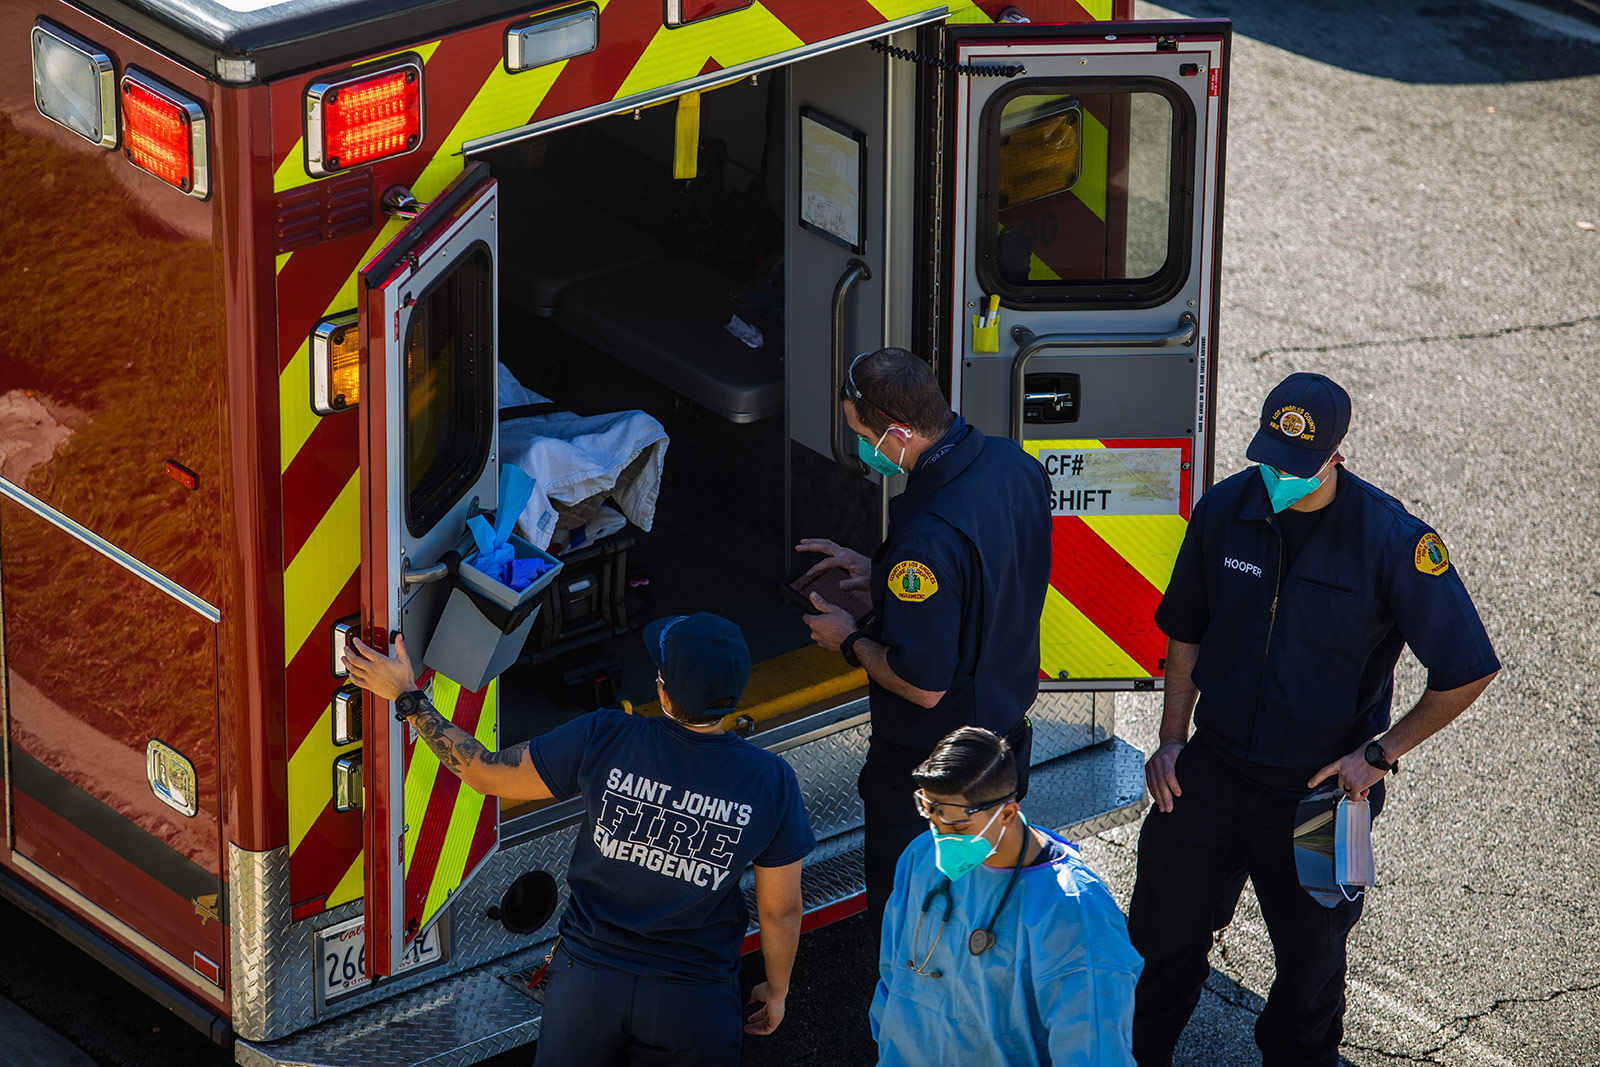 Los Angeles County paramedics load a potential Covid-19 patient into an ambulance before transporting him to a hospital in Hawthorne, California, on December 29.